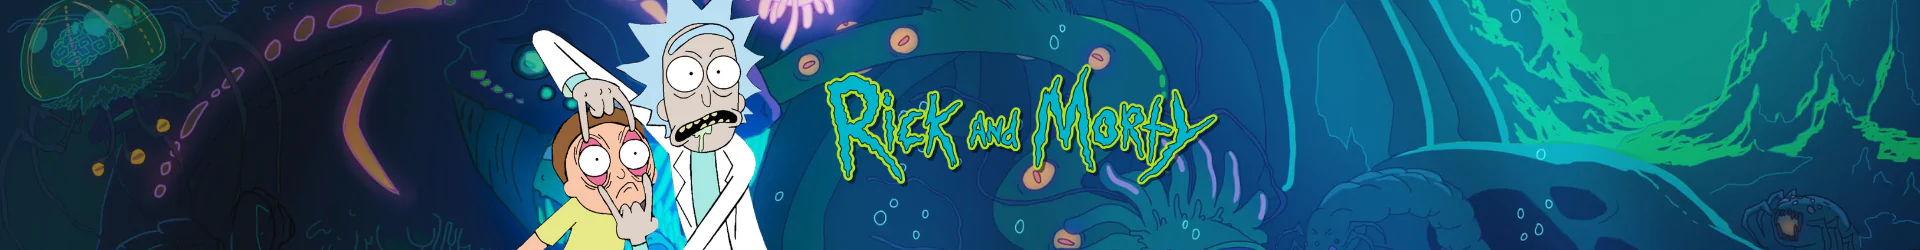 Rick and Morty products banner